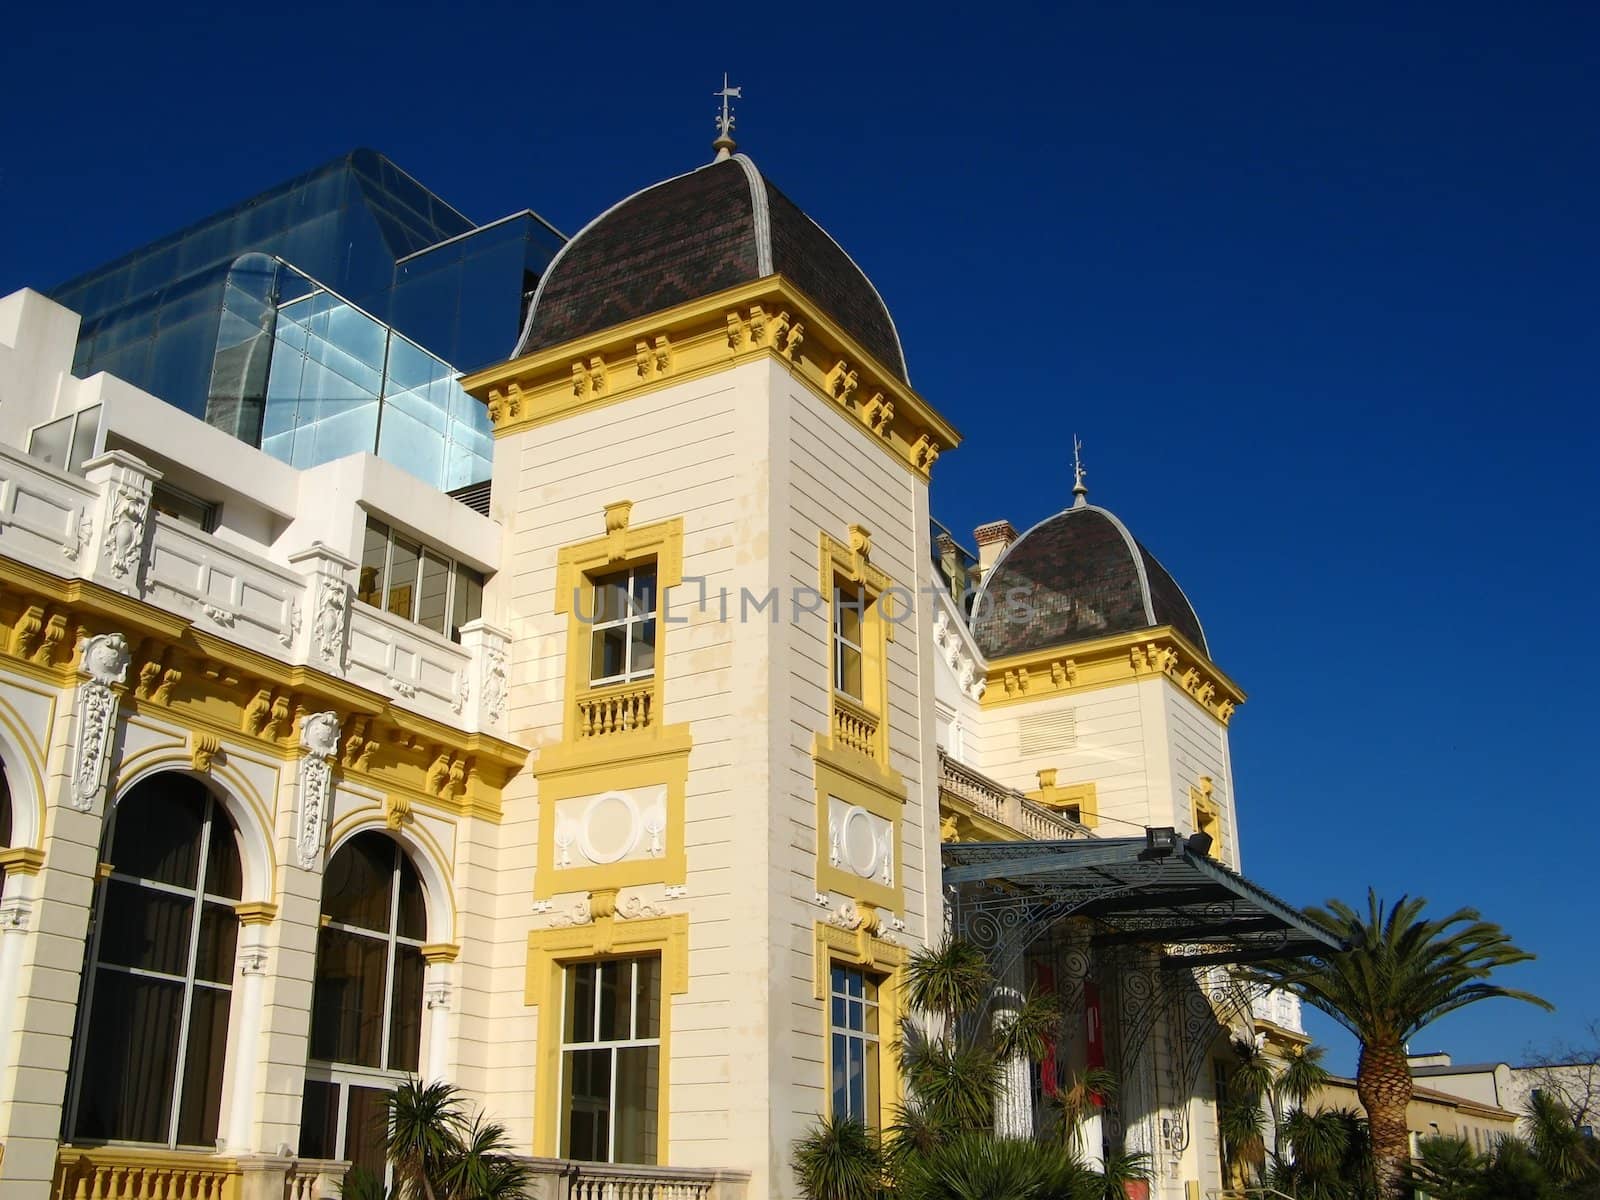 View of an ancient casino building on french riviera